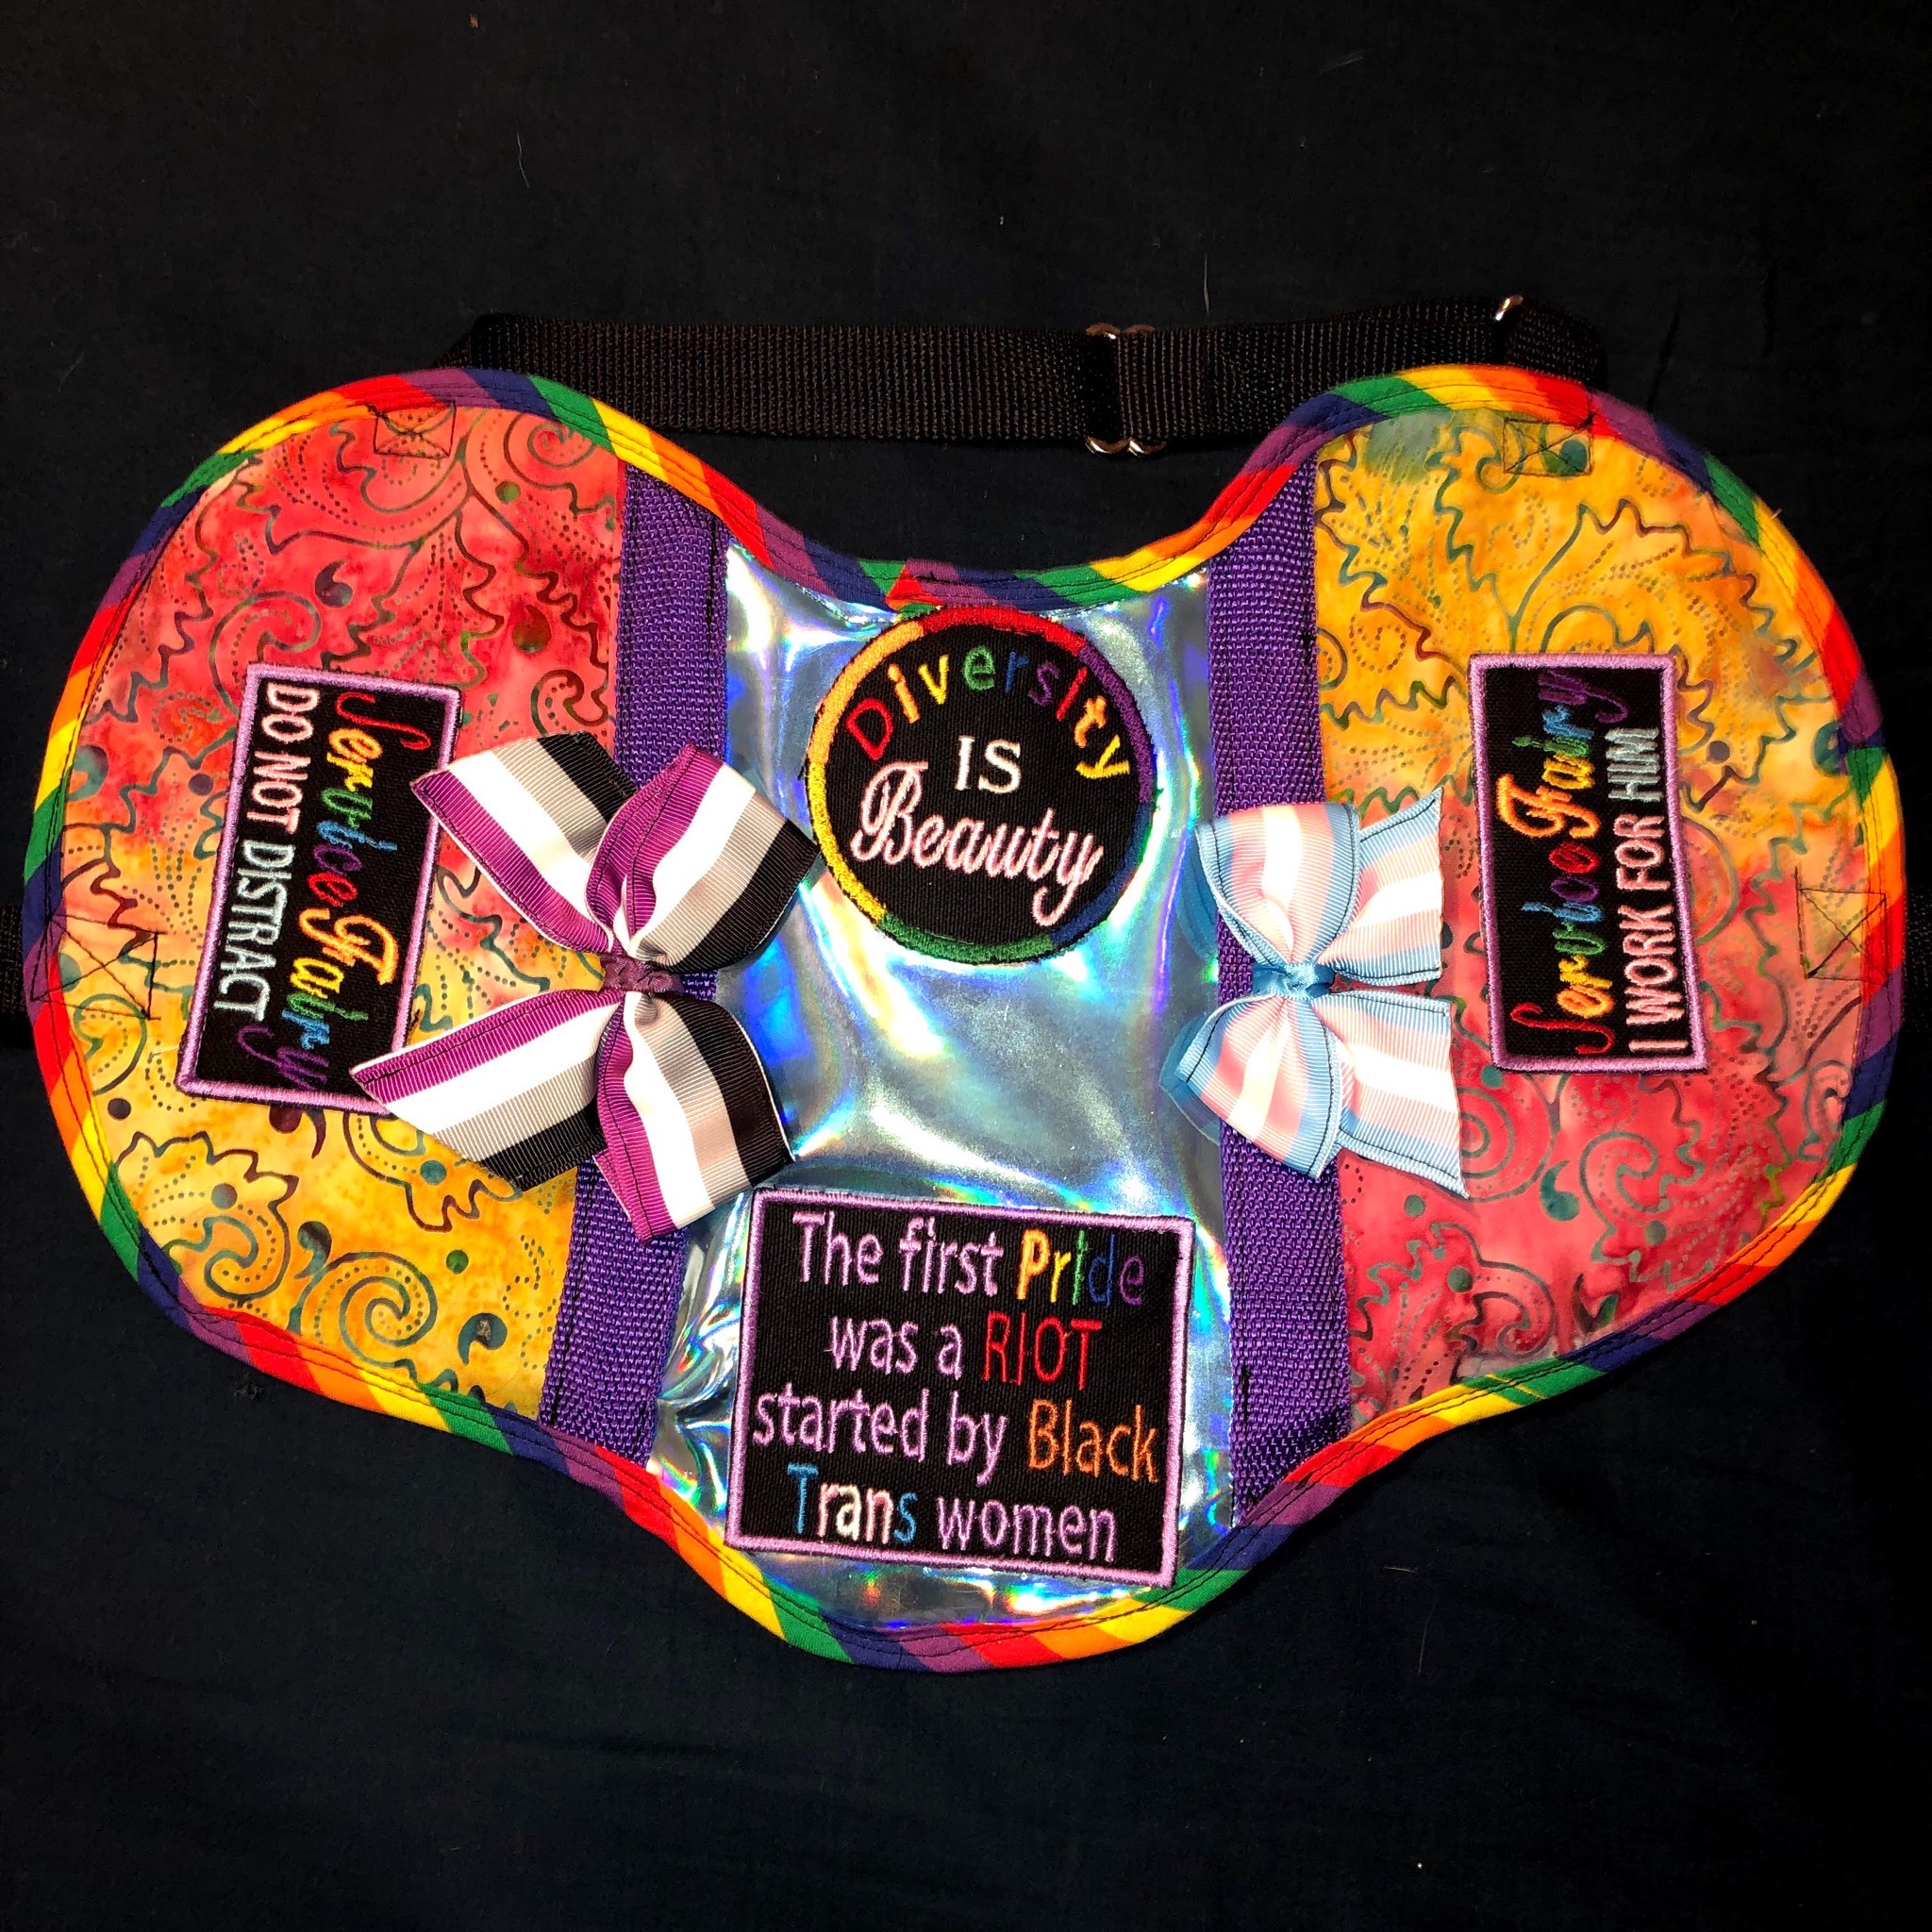 Pride themed service dog vest and patches by Lynxxheart on DeviantArt